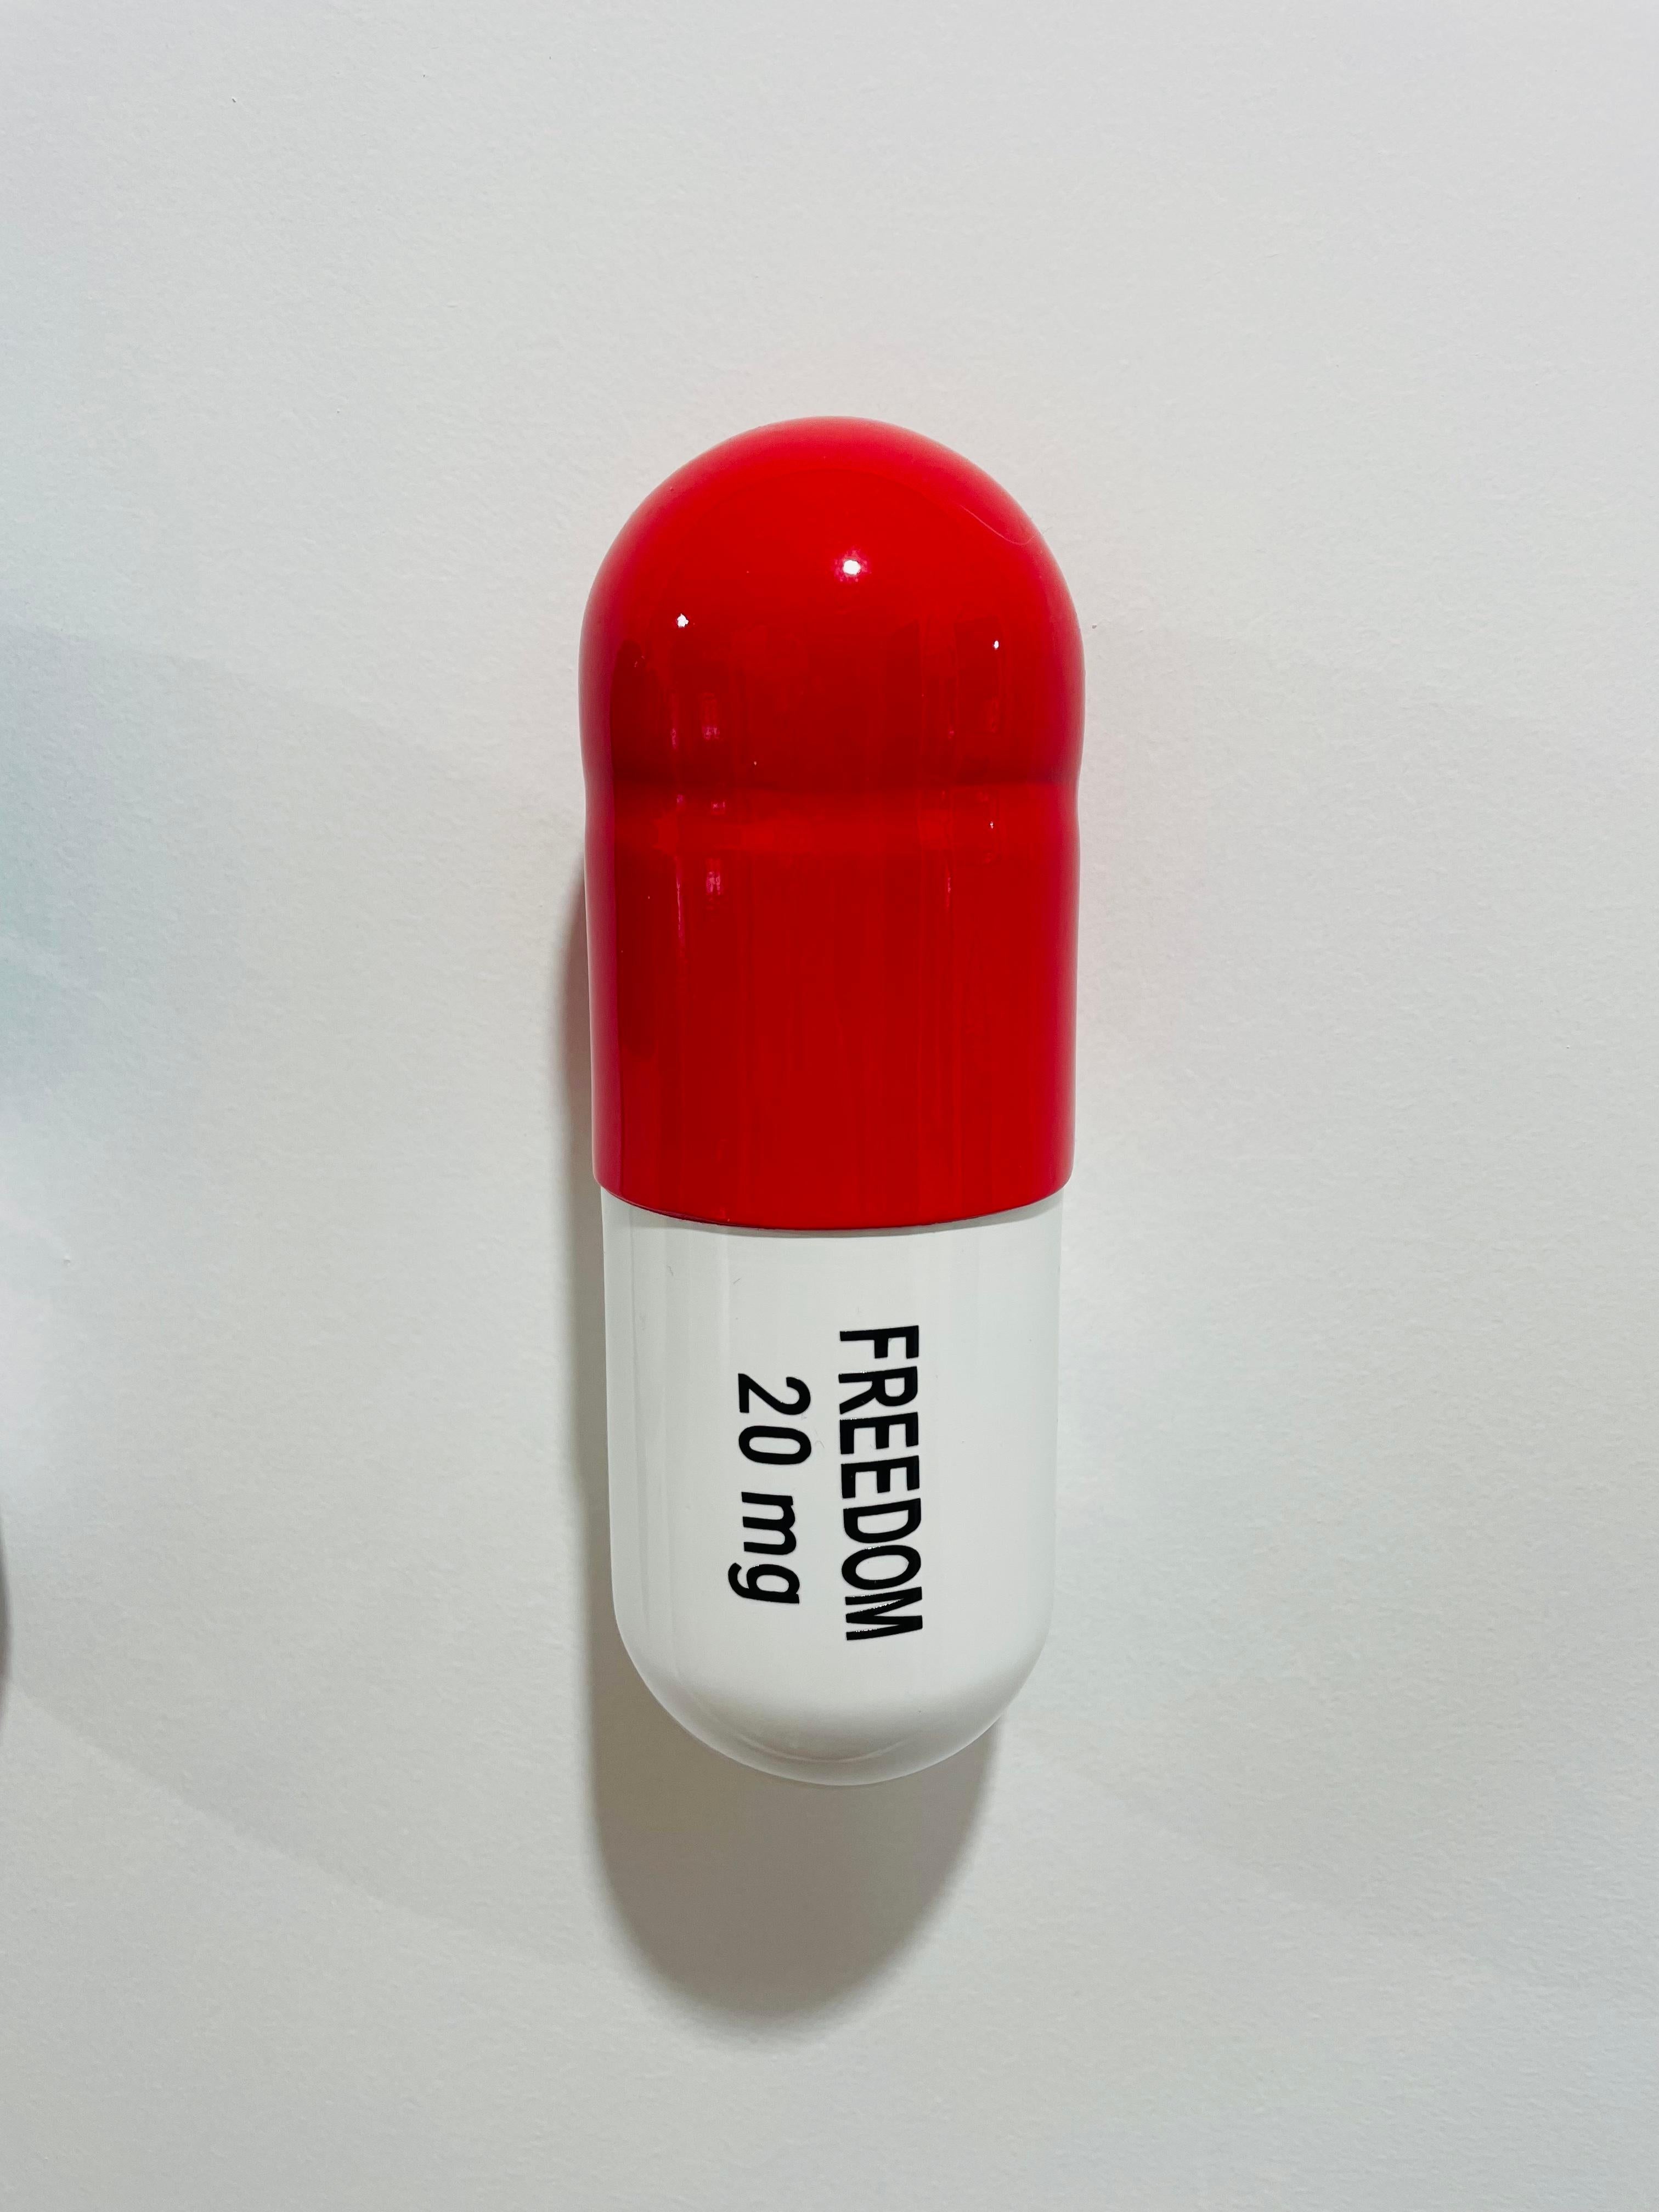 Tal Nehoray Still-Life Sculpture - 20 MG Freedom pill (white and red) - figurative sculpture